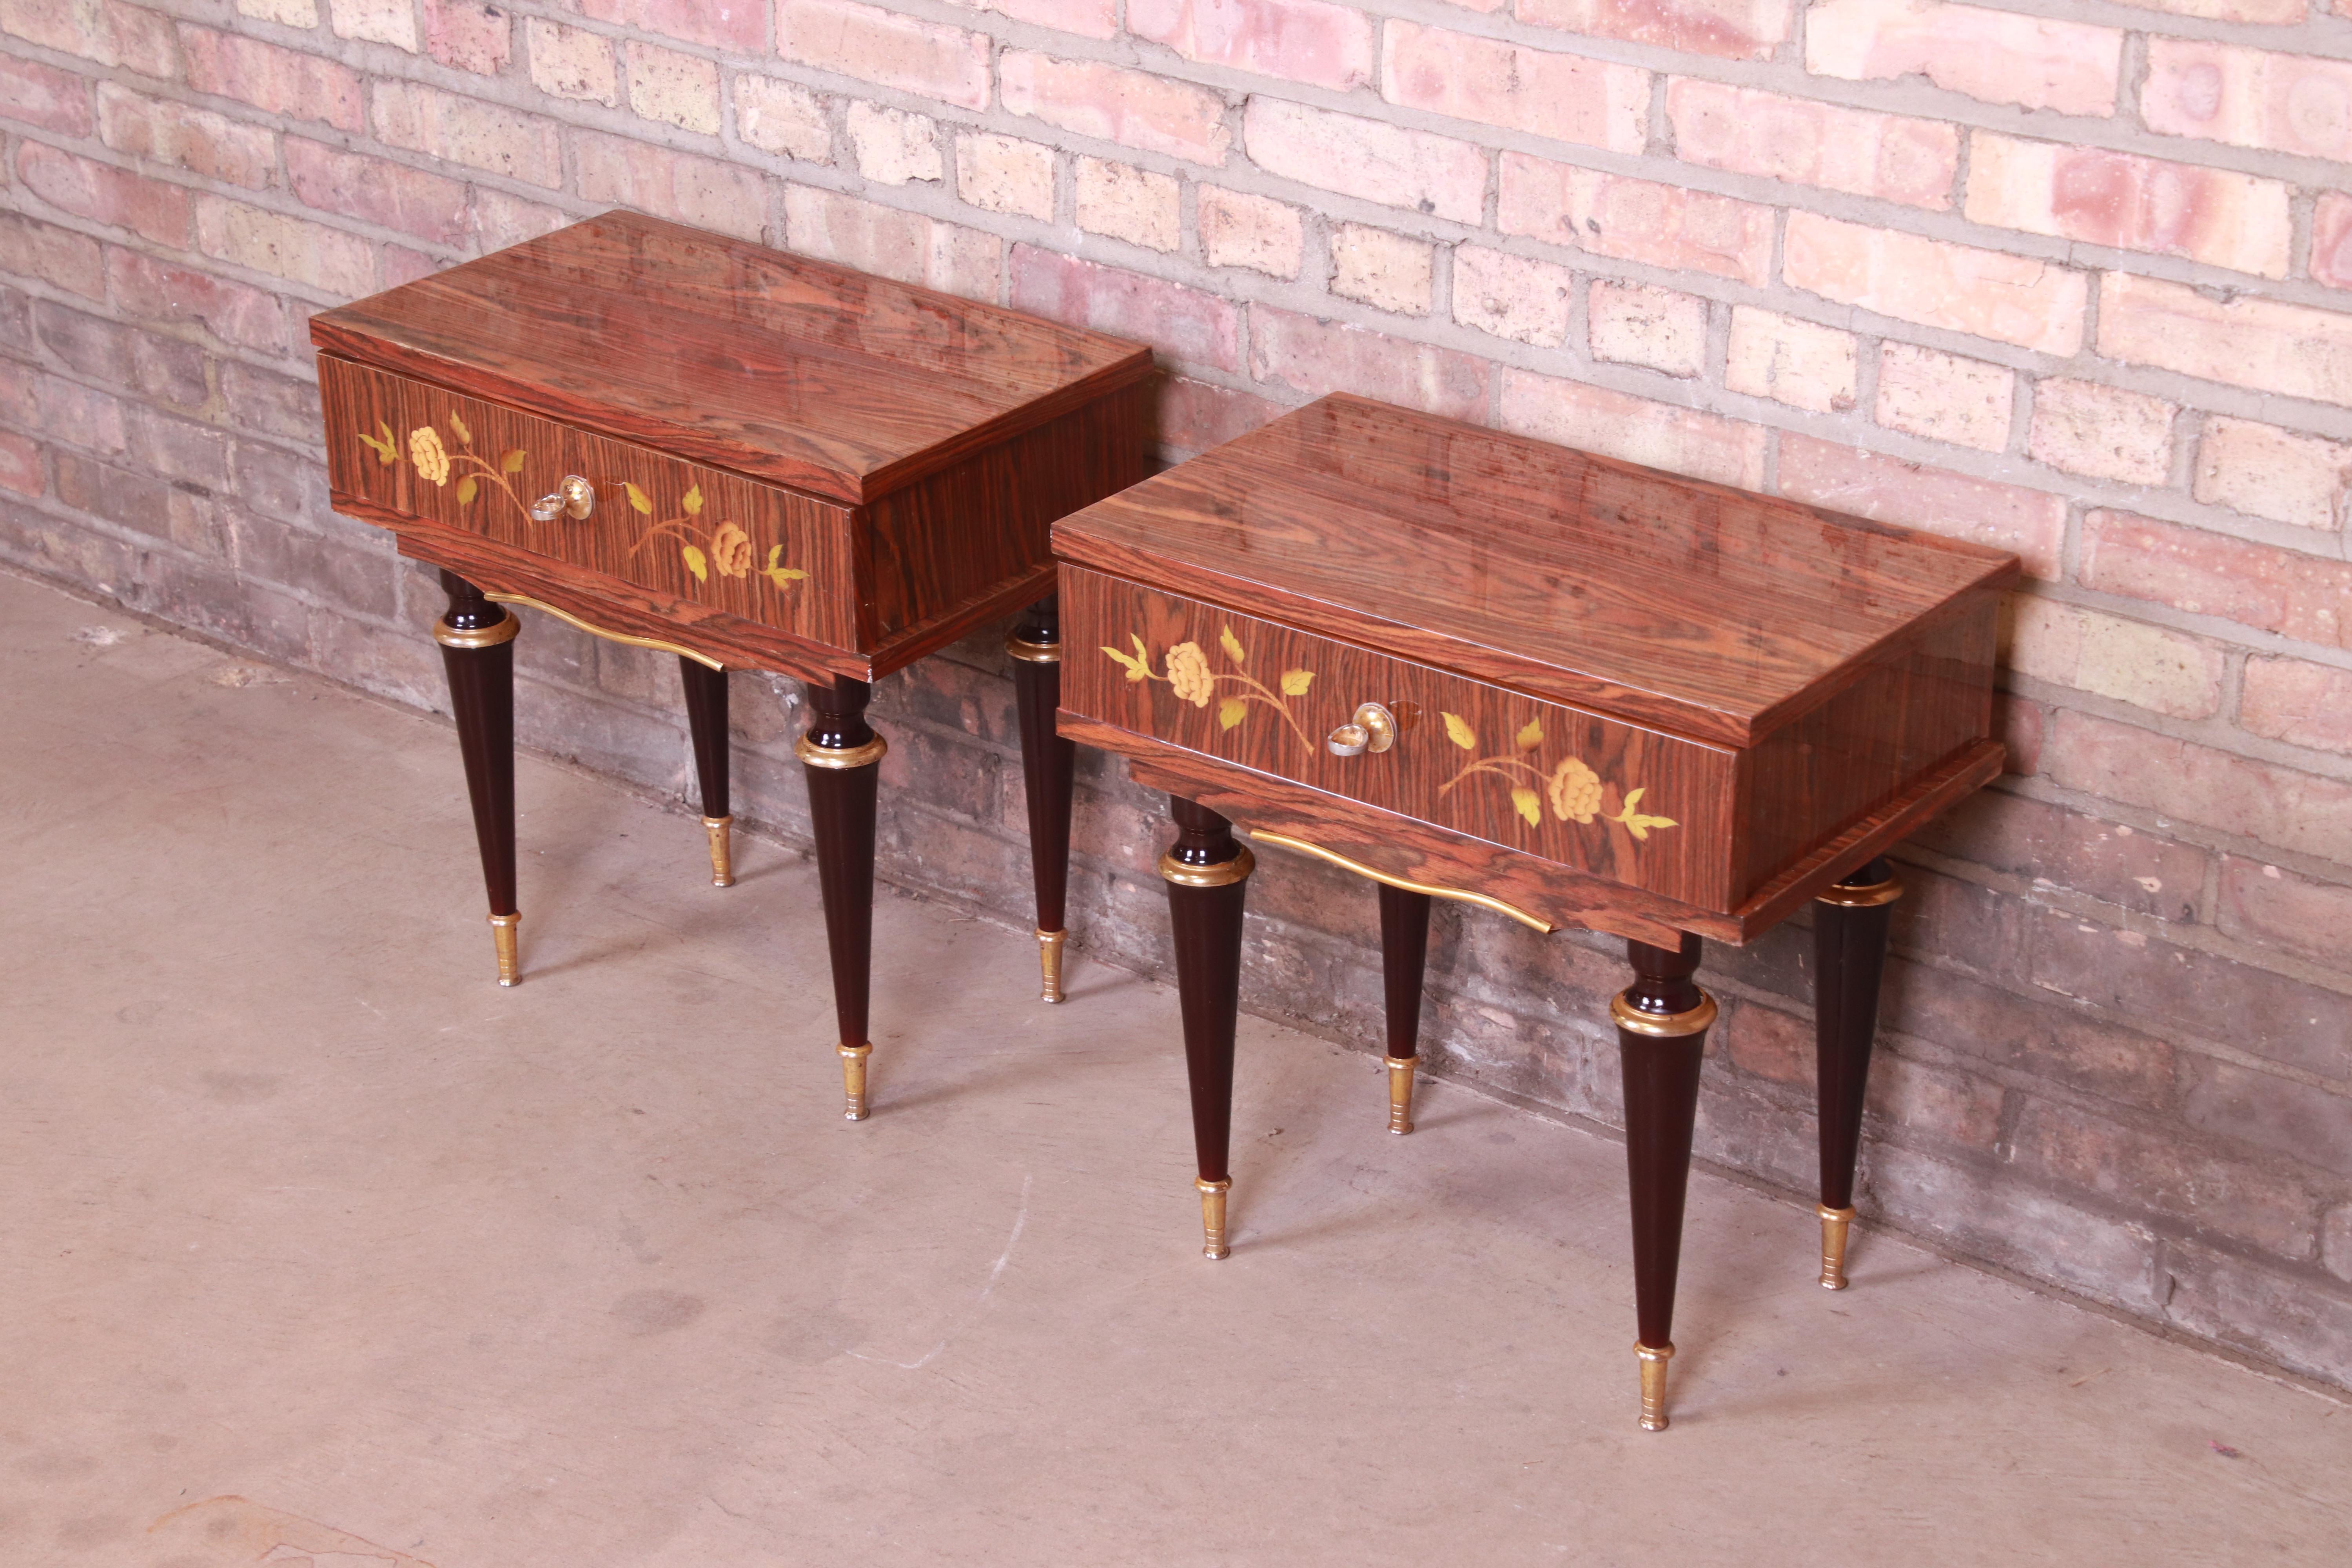 Mid-20th Century French Art Deco Macassar Ebony Inlaid Marquetry Nightstands, Circa 1950s For Sale